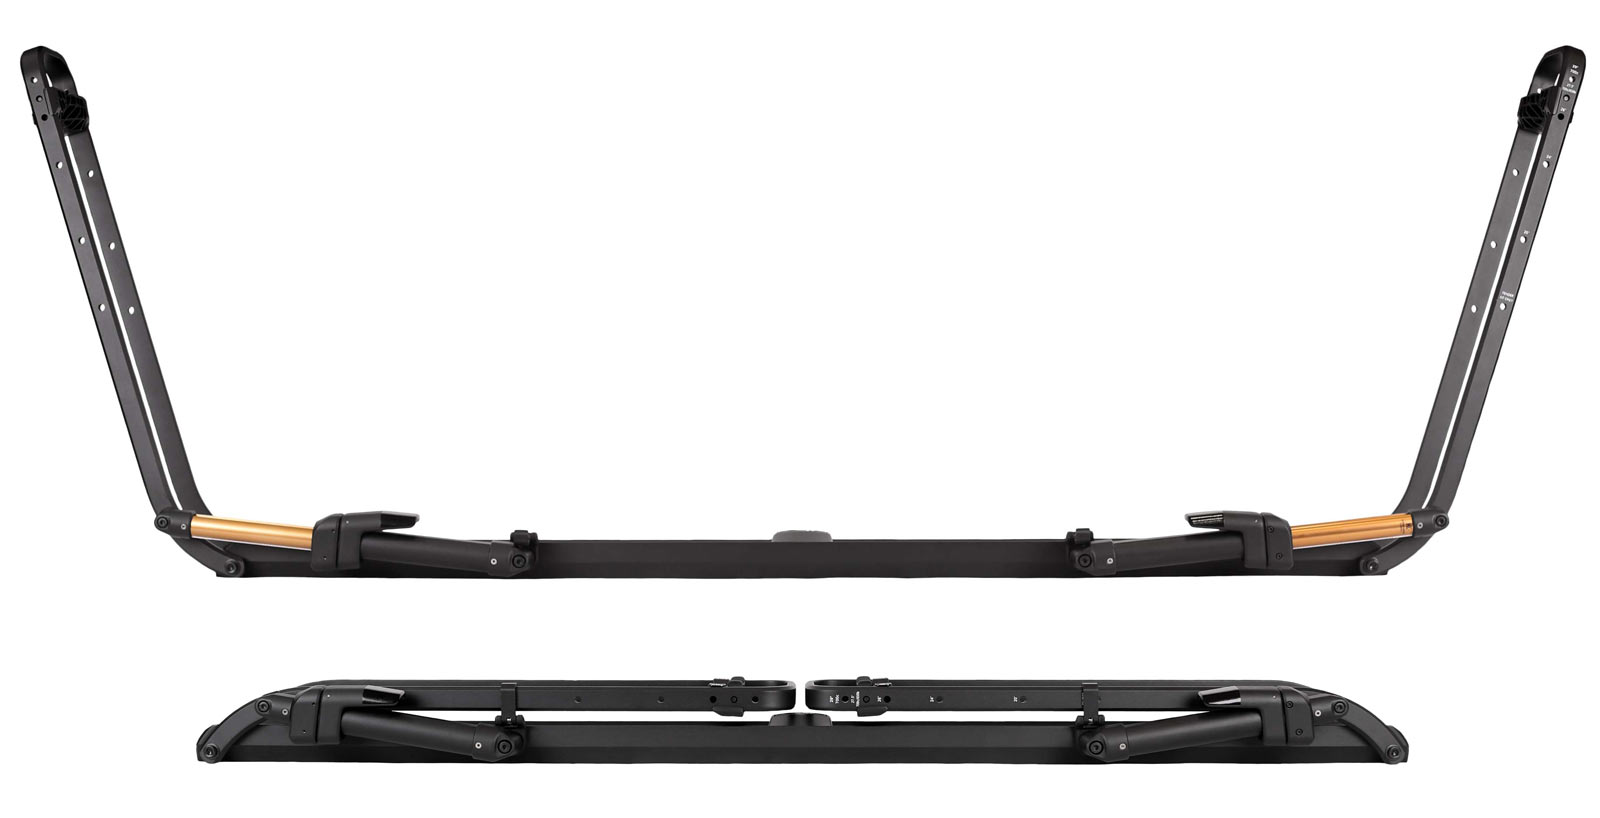 kuat piston SR single rail roof rack tray shown opened and closed